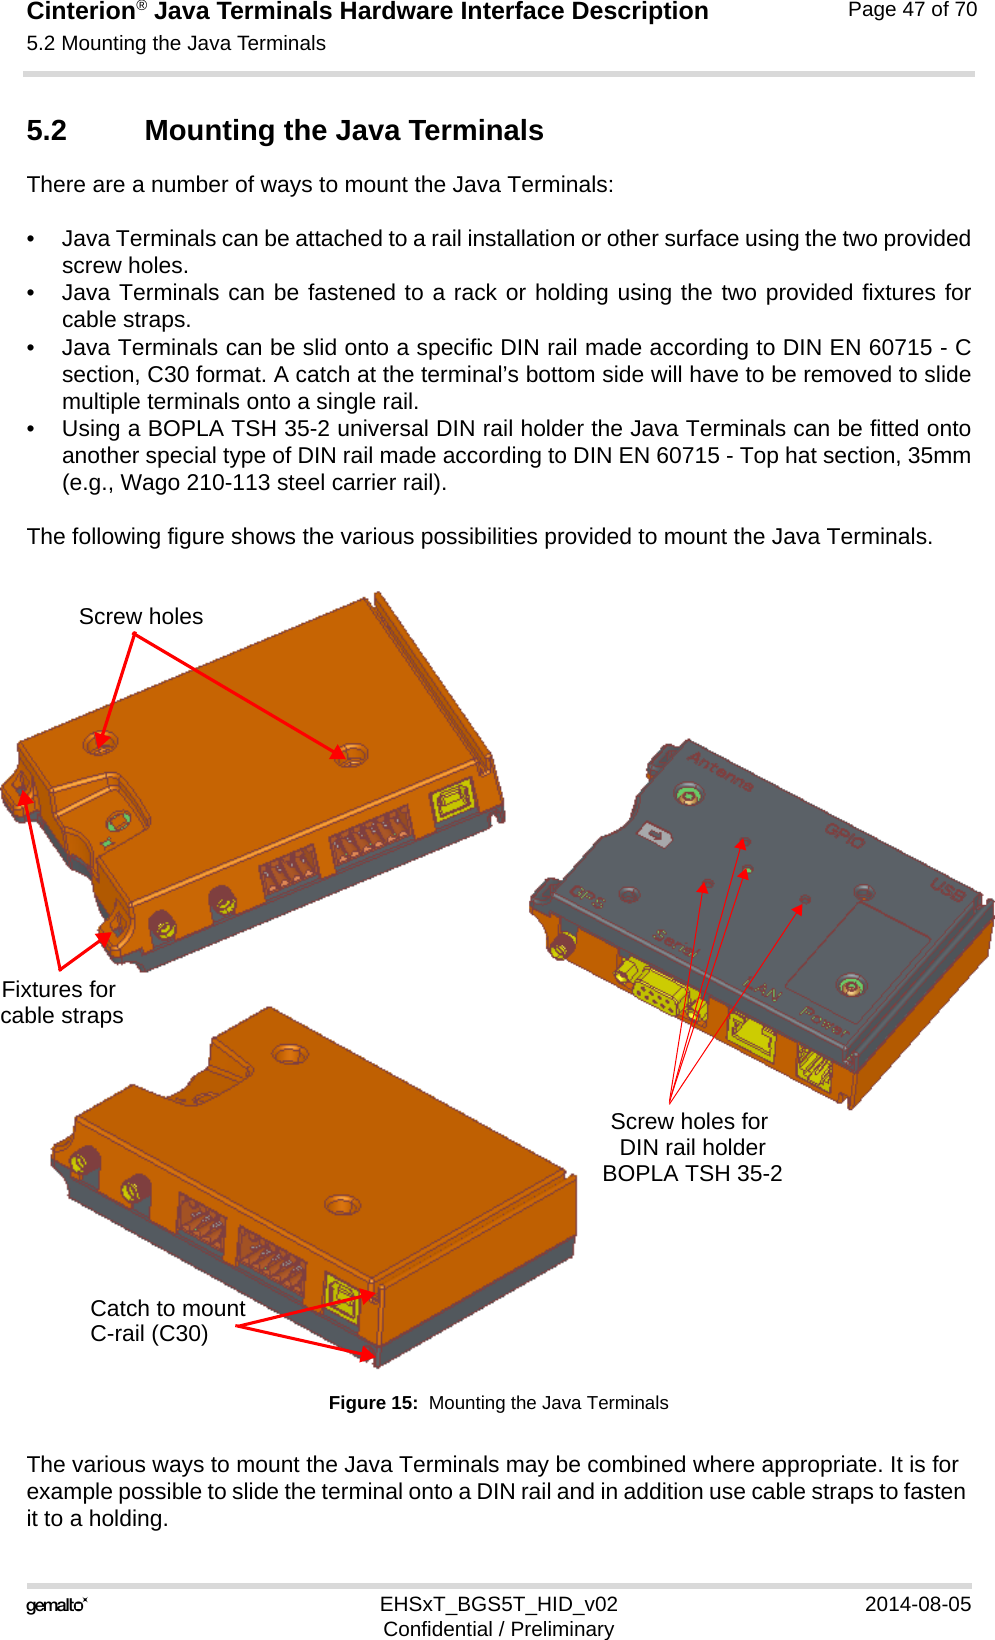 Cinterion® Java Terminals Hardware Interface Description5.2 Mounting the Java Terminals48EHSxT_BGS5T_HID_v02 2014-08-05Confidential / PreliminaryPage 47 of 705.2 Mounting the Java TerminalsThere are a number of ways to mount the Java Terminals: • Java Terminals can be attached to a rail installation or other surface using the two providedscrew holes. • Java Terminals can be fastened to a rack or holding using the two provided fixtures forcable straps.• Java Terminals can be slid onto a specific DIN rail made according to DIN EN 60715 - Csection, C30 format. A catch at the terminal’s bottom side will have to be removed to slidemultiple terminals onto a single rail.• Using a BOPLA TSH 35-2 universal DIN rail holder the Java Terminals can be fitted ontoanother special type of DIN rail made according to DIN EN 60715 - Top hat section, 35mm(e.g., Wago 210-113 steel carrier rail).The following figure shows the various possibilities provided to mount the Java Terminals.Figure 15:  Mounting the Java TerminalsThe various ways to mount the Java Terminals may be combined where appropriate. It is for example possible to slide the terminal onto a DIN rail and in addition use cable straps to fasten it to a holding.Catch to mountScrew holes for Screw holesFixtures for cable strapsDIN rail holderC-rail (C30)BOPLA TSH 35-2